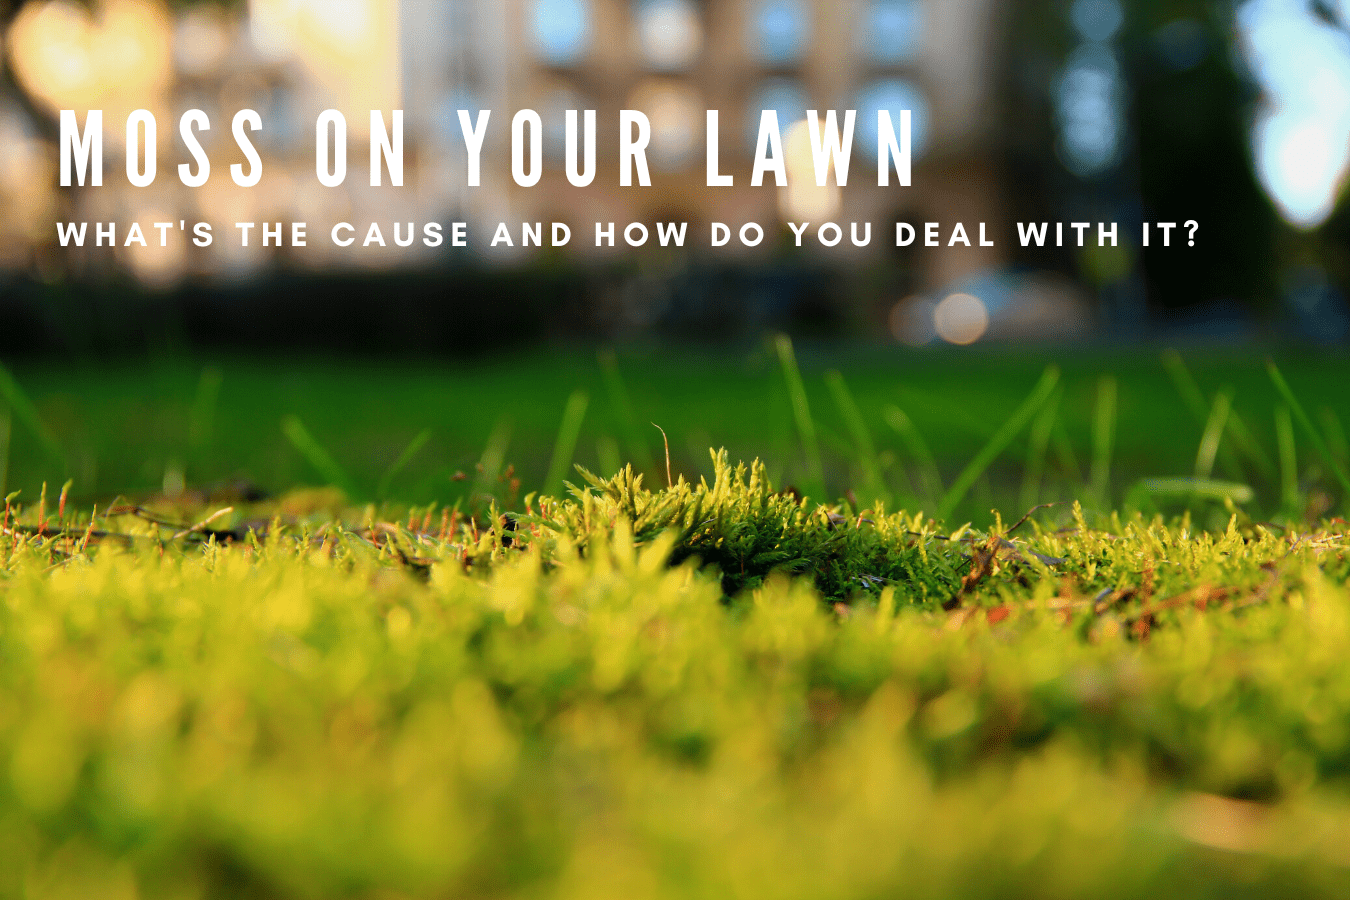 Moss on your lawn: What’s the cause and how do you deal with it?